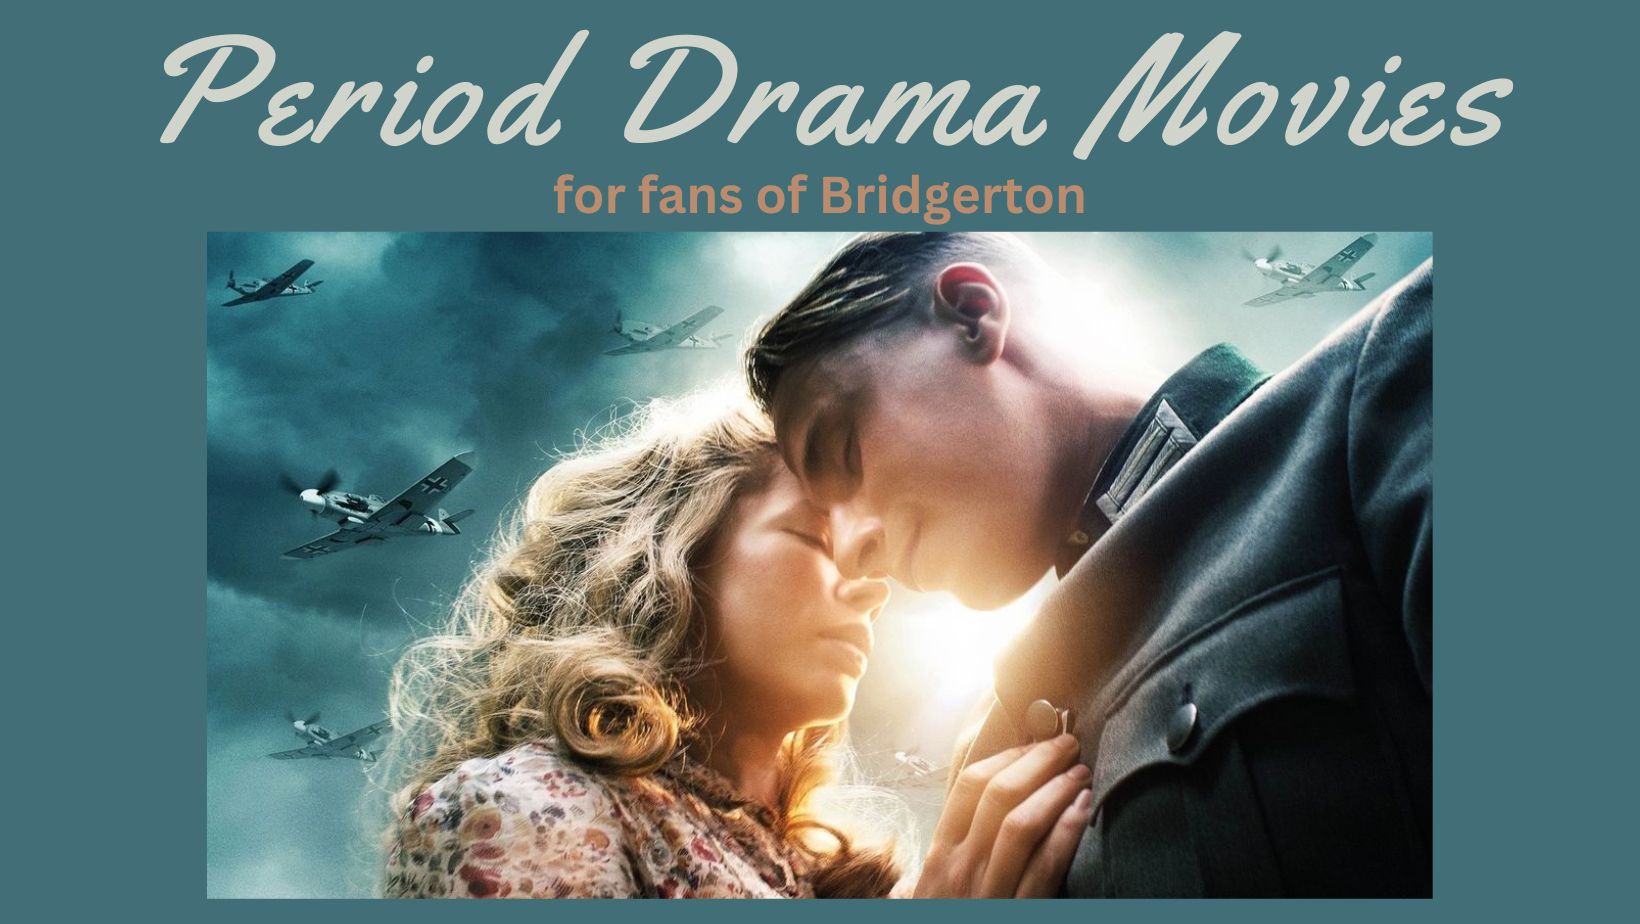 Like This Watch That: 20 Period Drama Movies for Bridgerton Fans